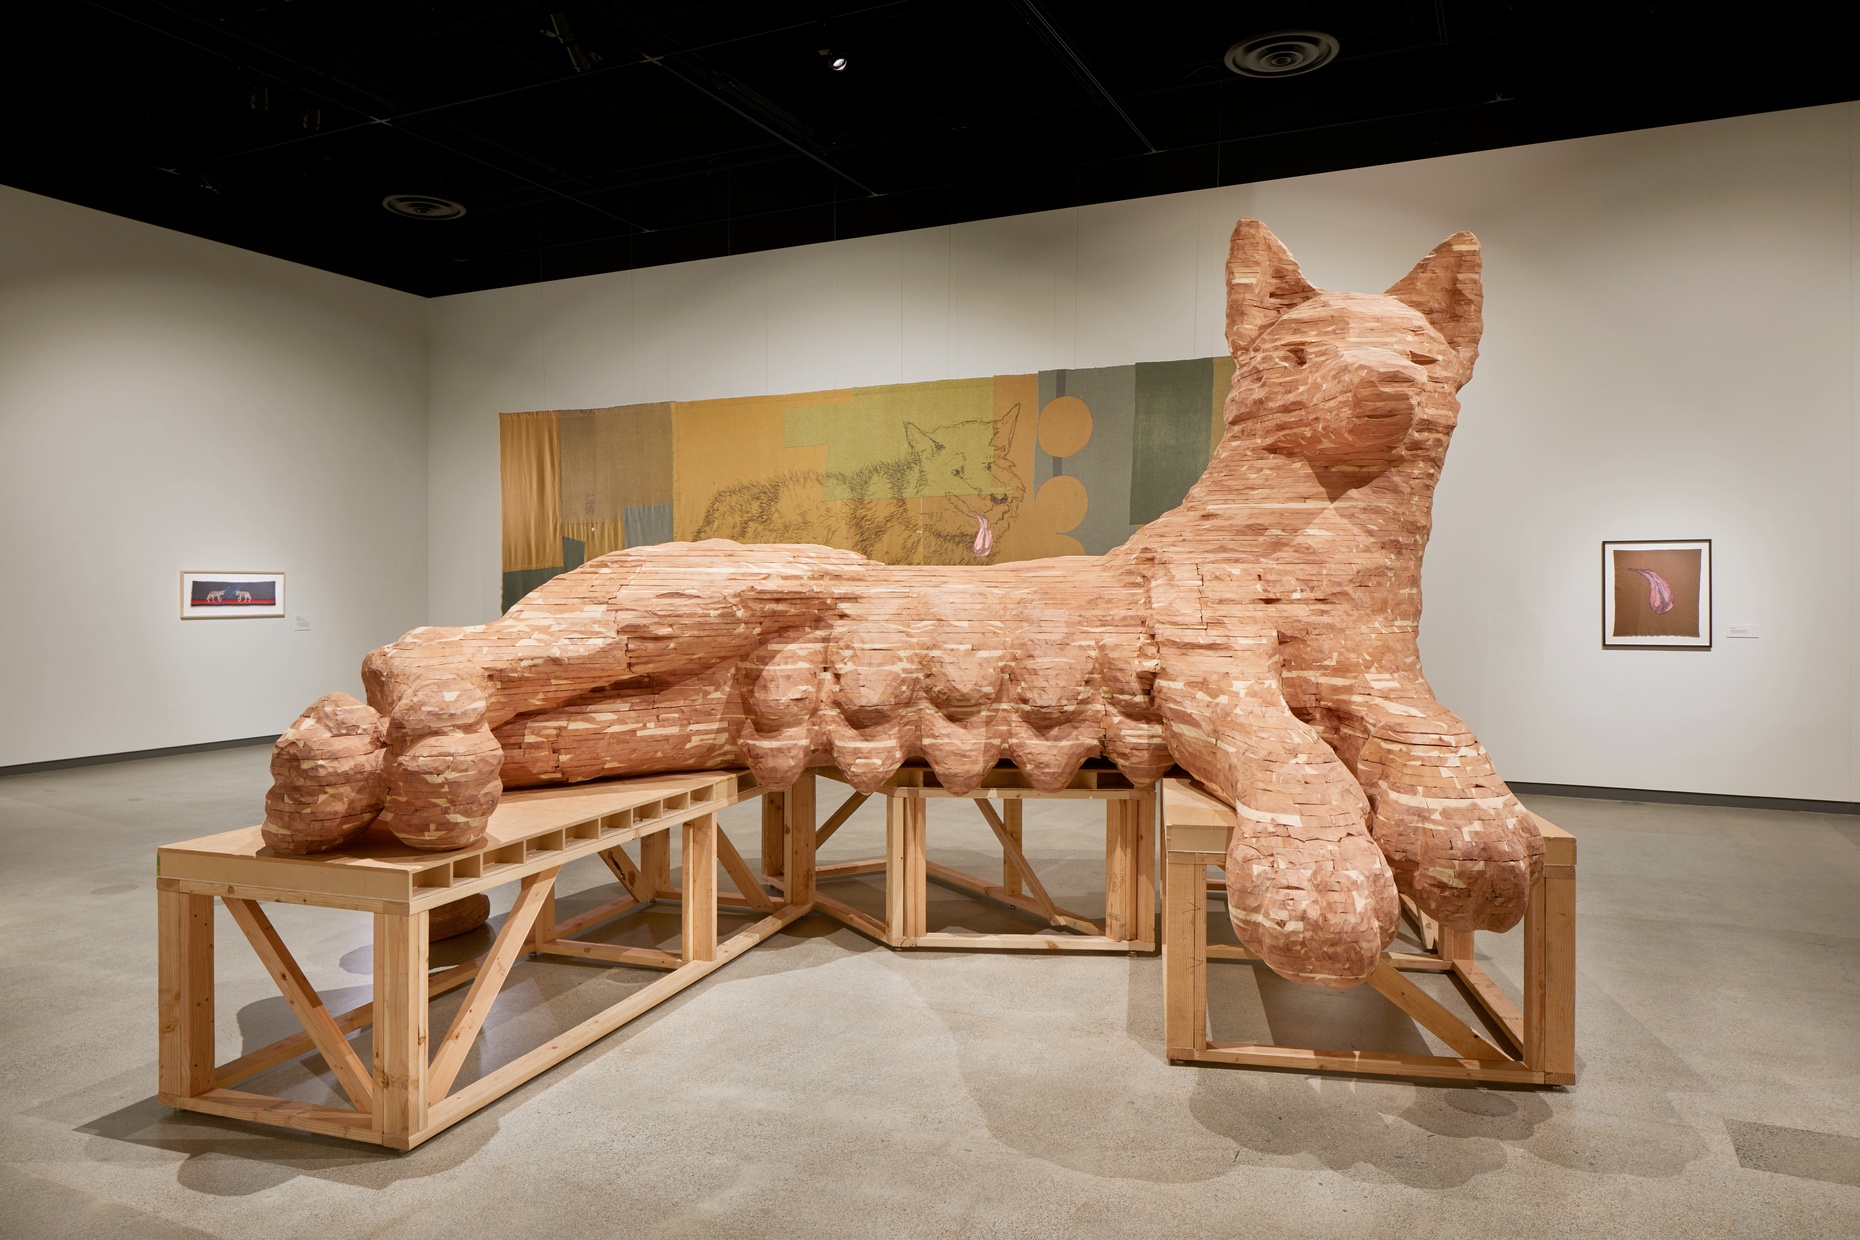 A large, carved sculpture of a reclining wolf with ten, full teats on it's stomach. 